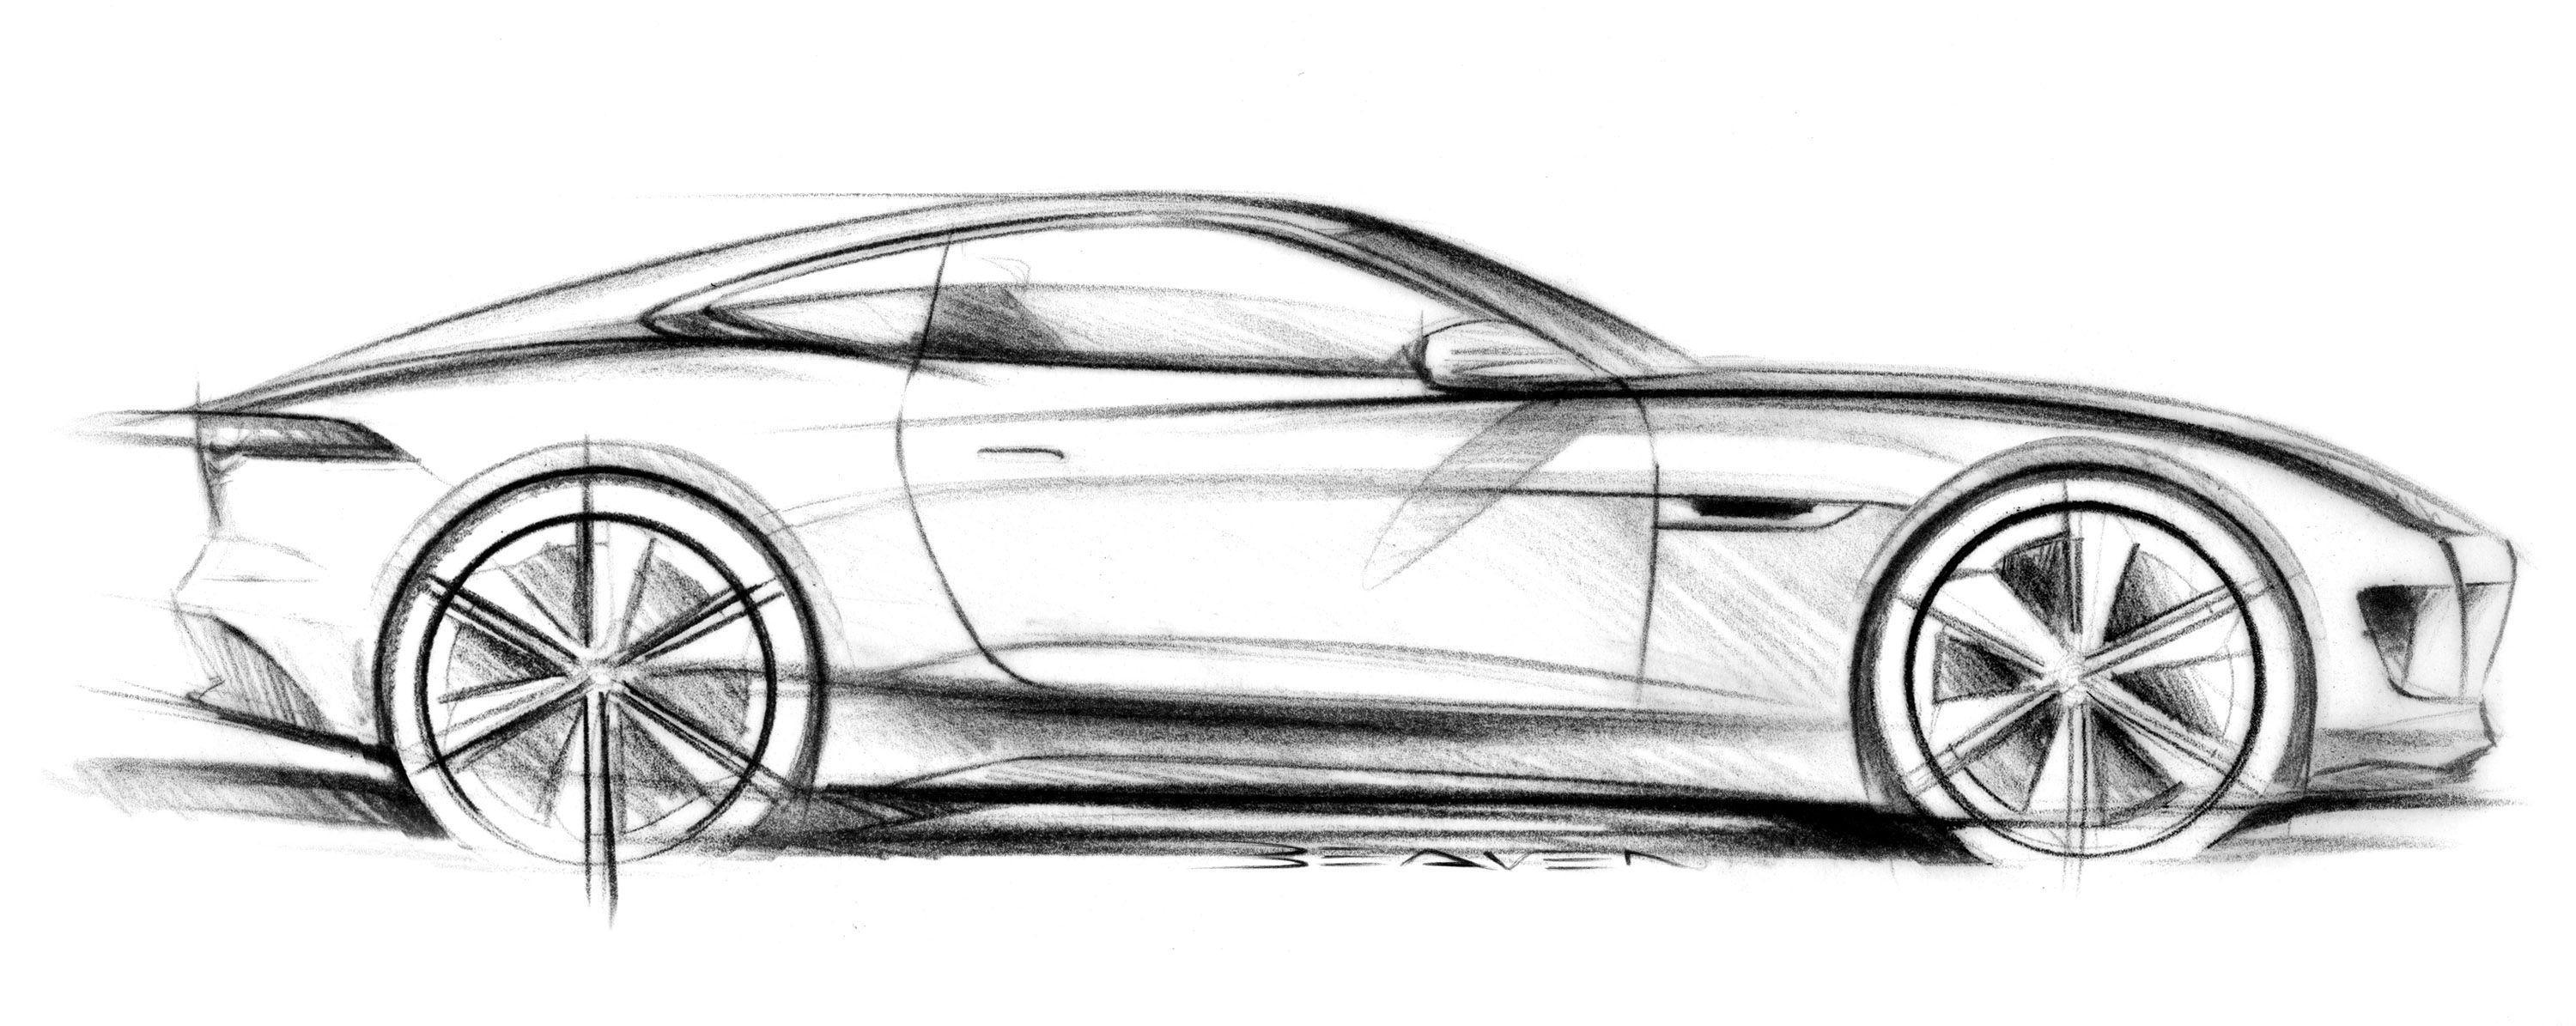 Here some image of cool drawings of cars made with pencil